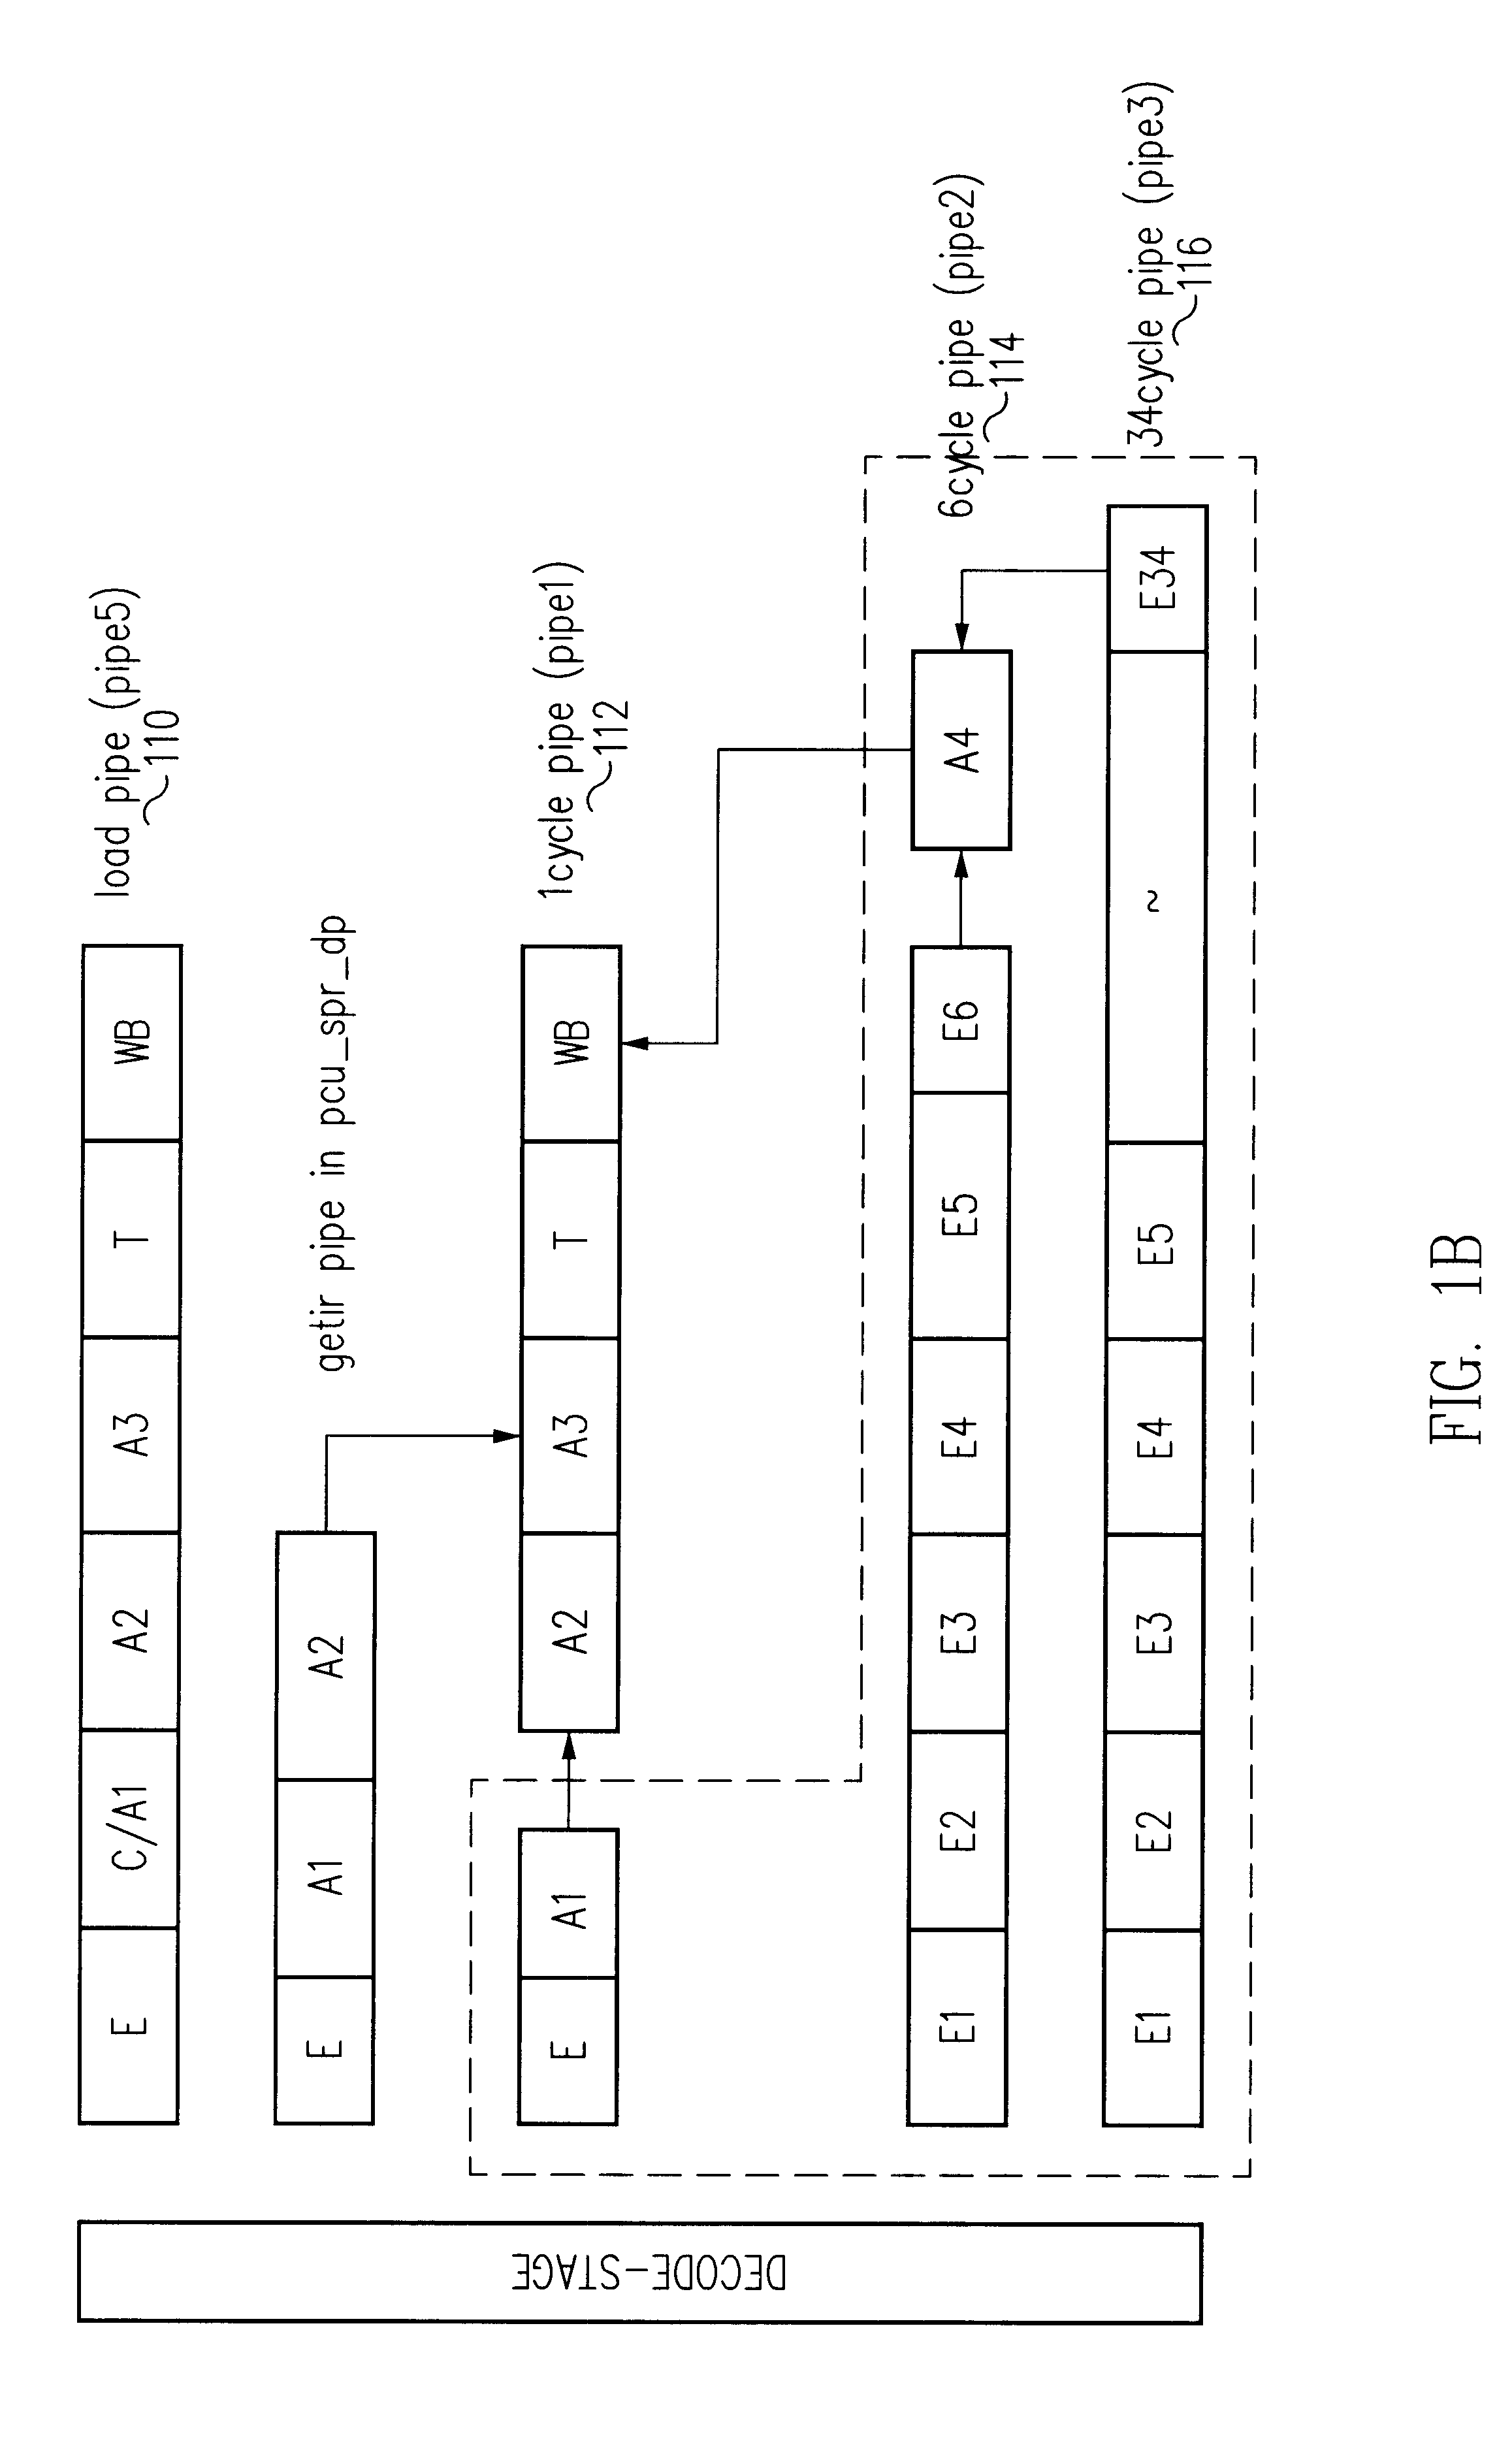 Floating point square root and reciprocal square root computation unit in a processor